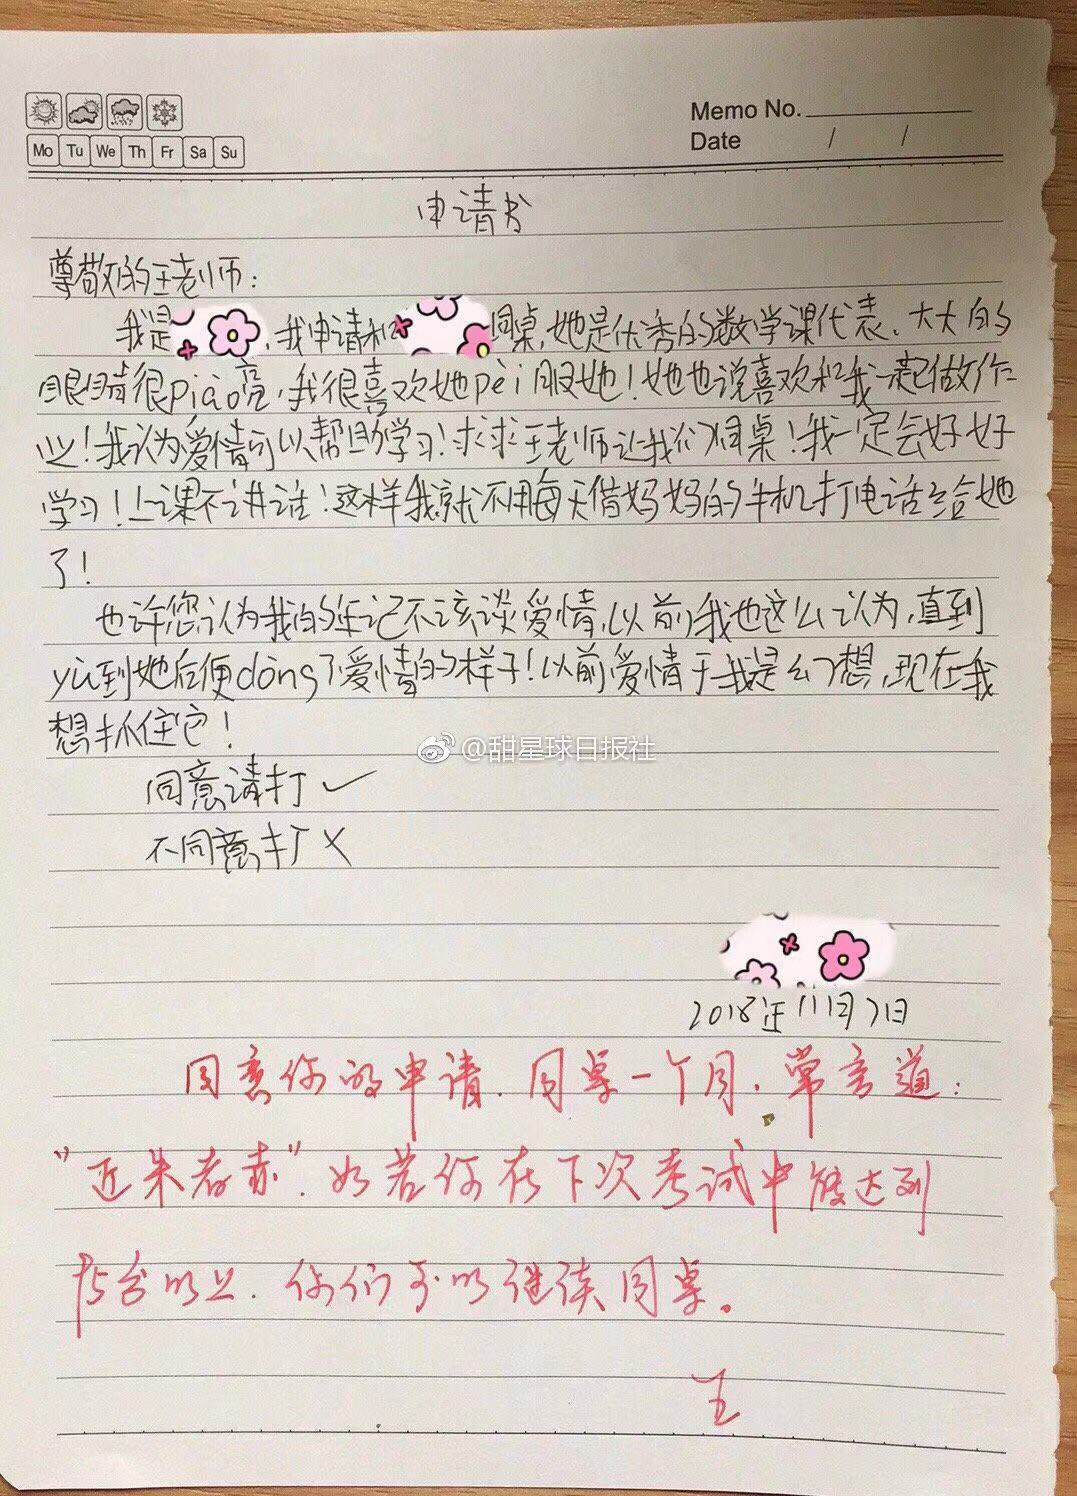 chinese-schoolboy-s-love-note-melts-millions-of-hearts-cgtn